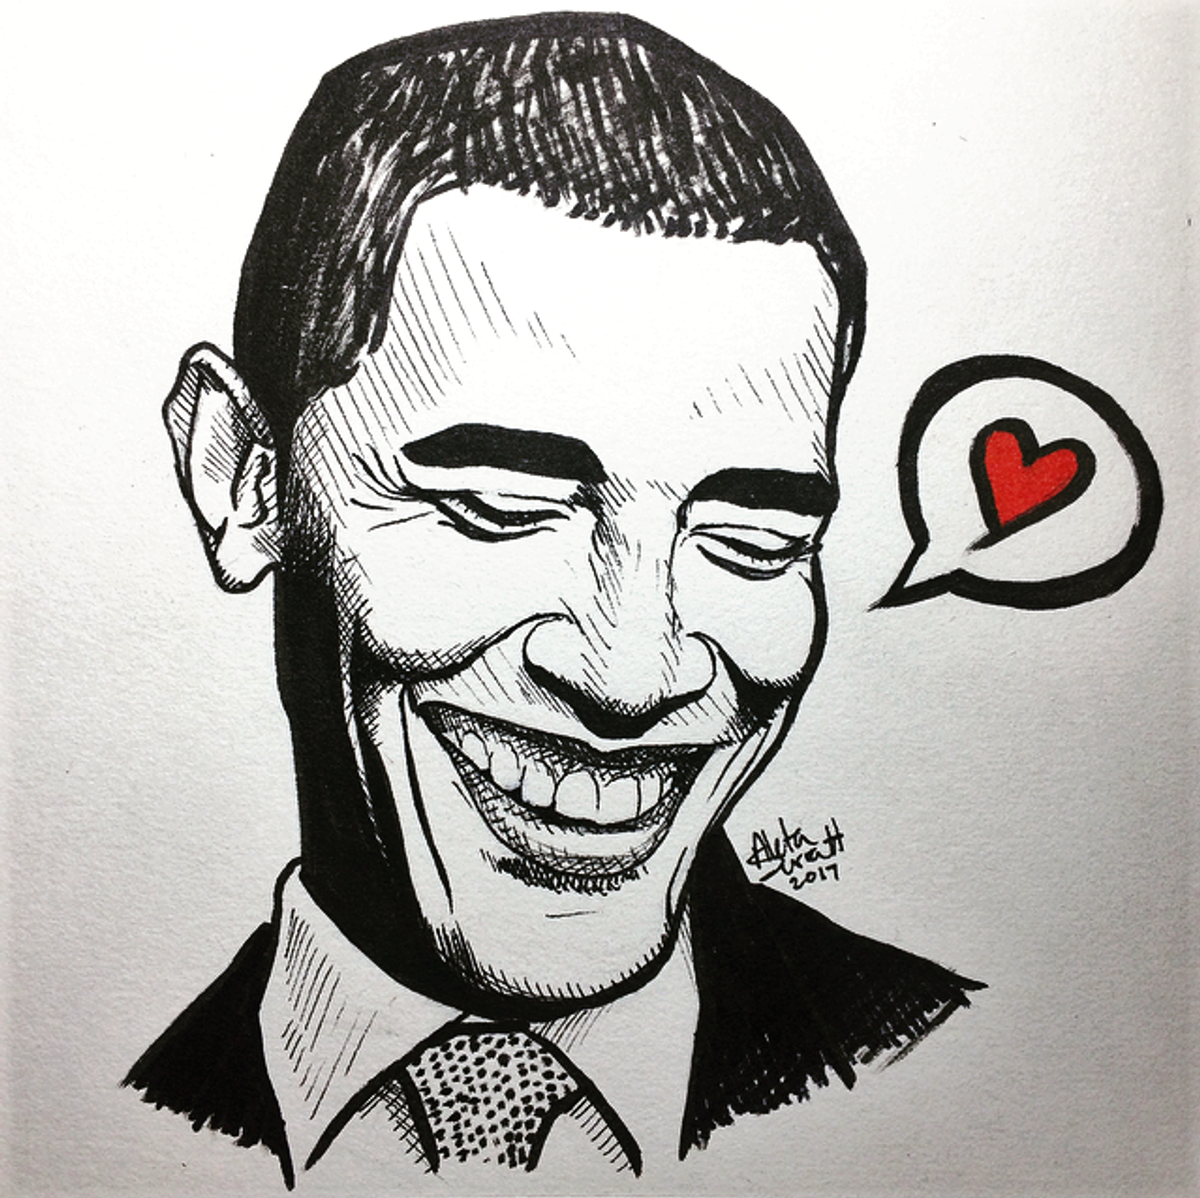 Video: Speed Drawing Of President Obama